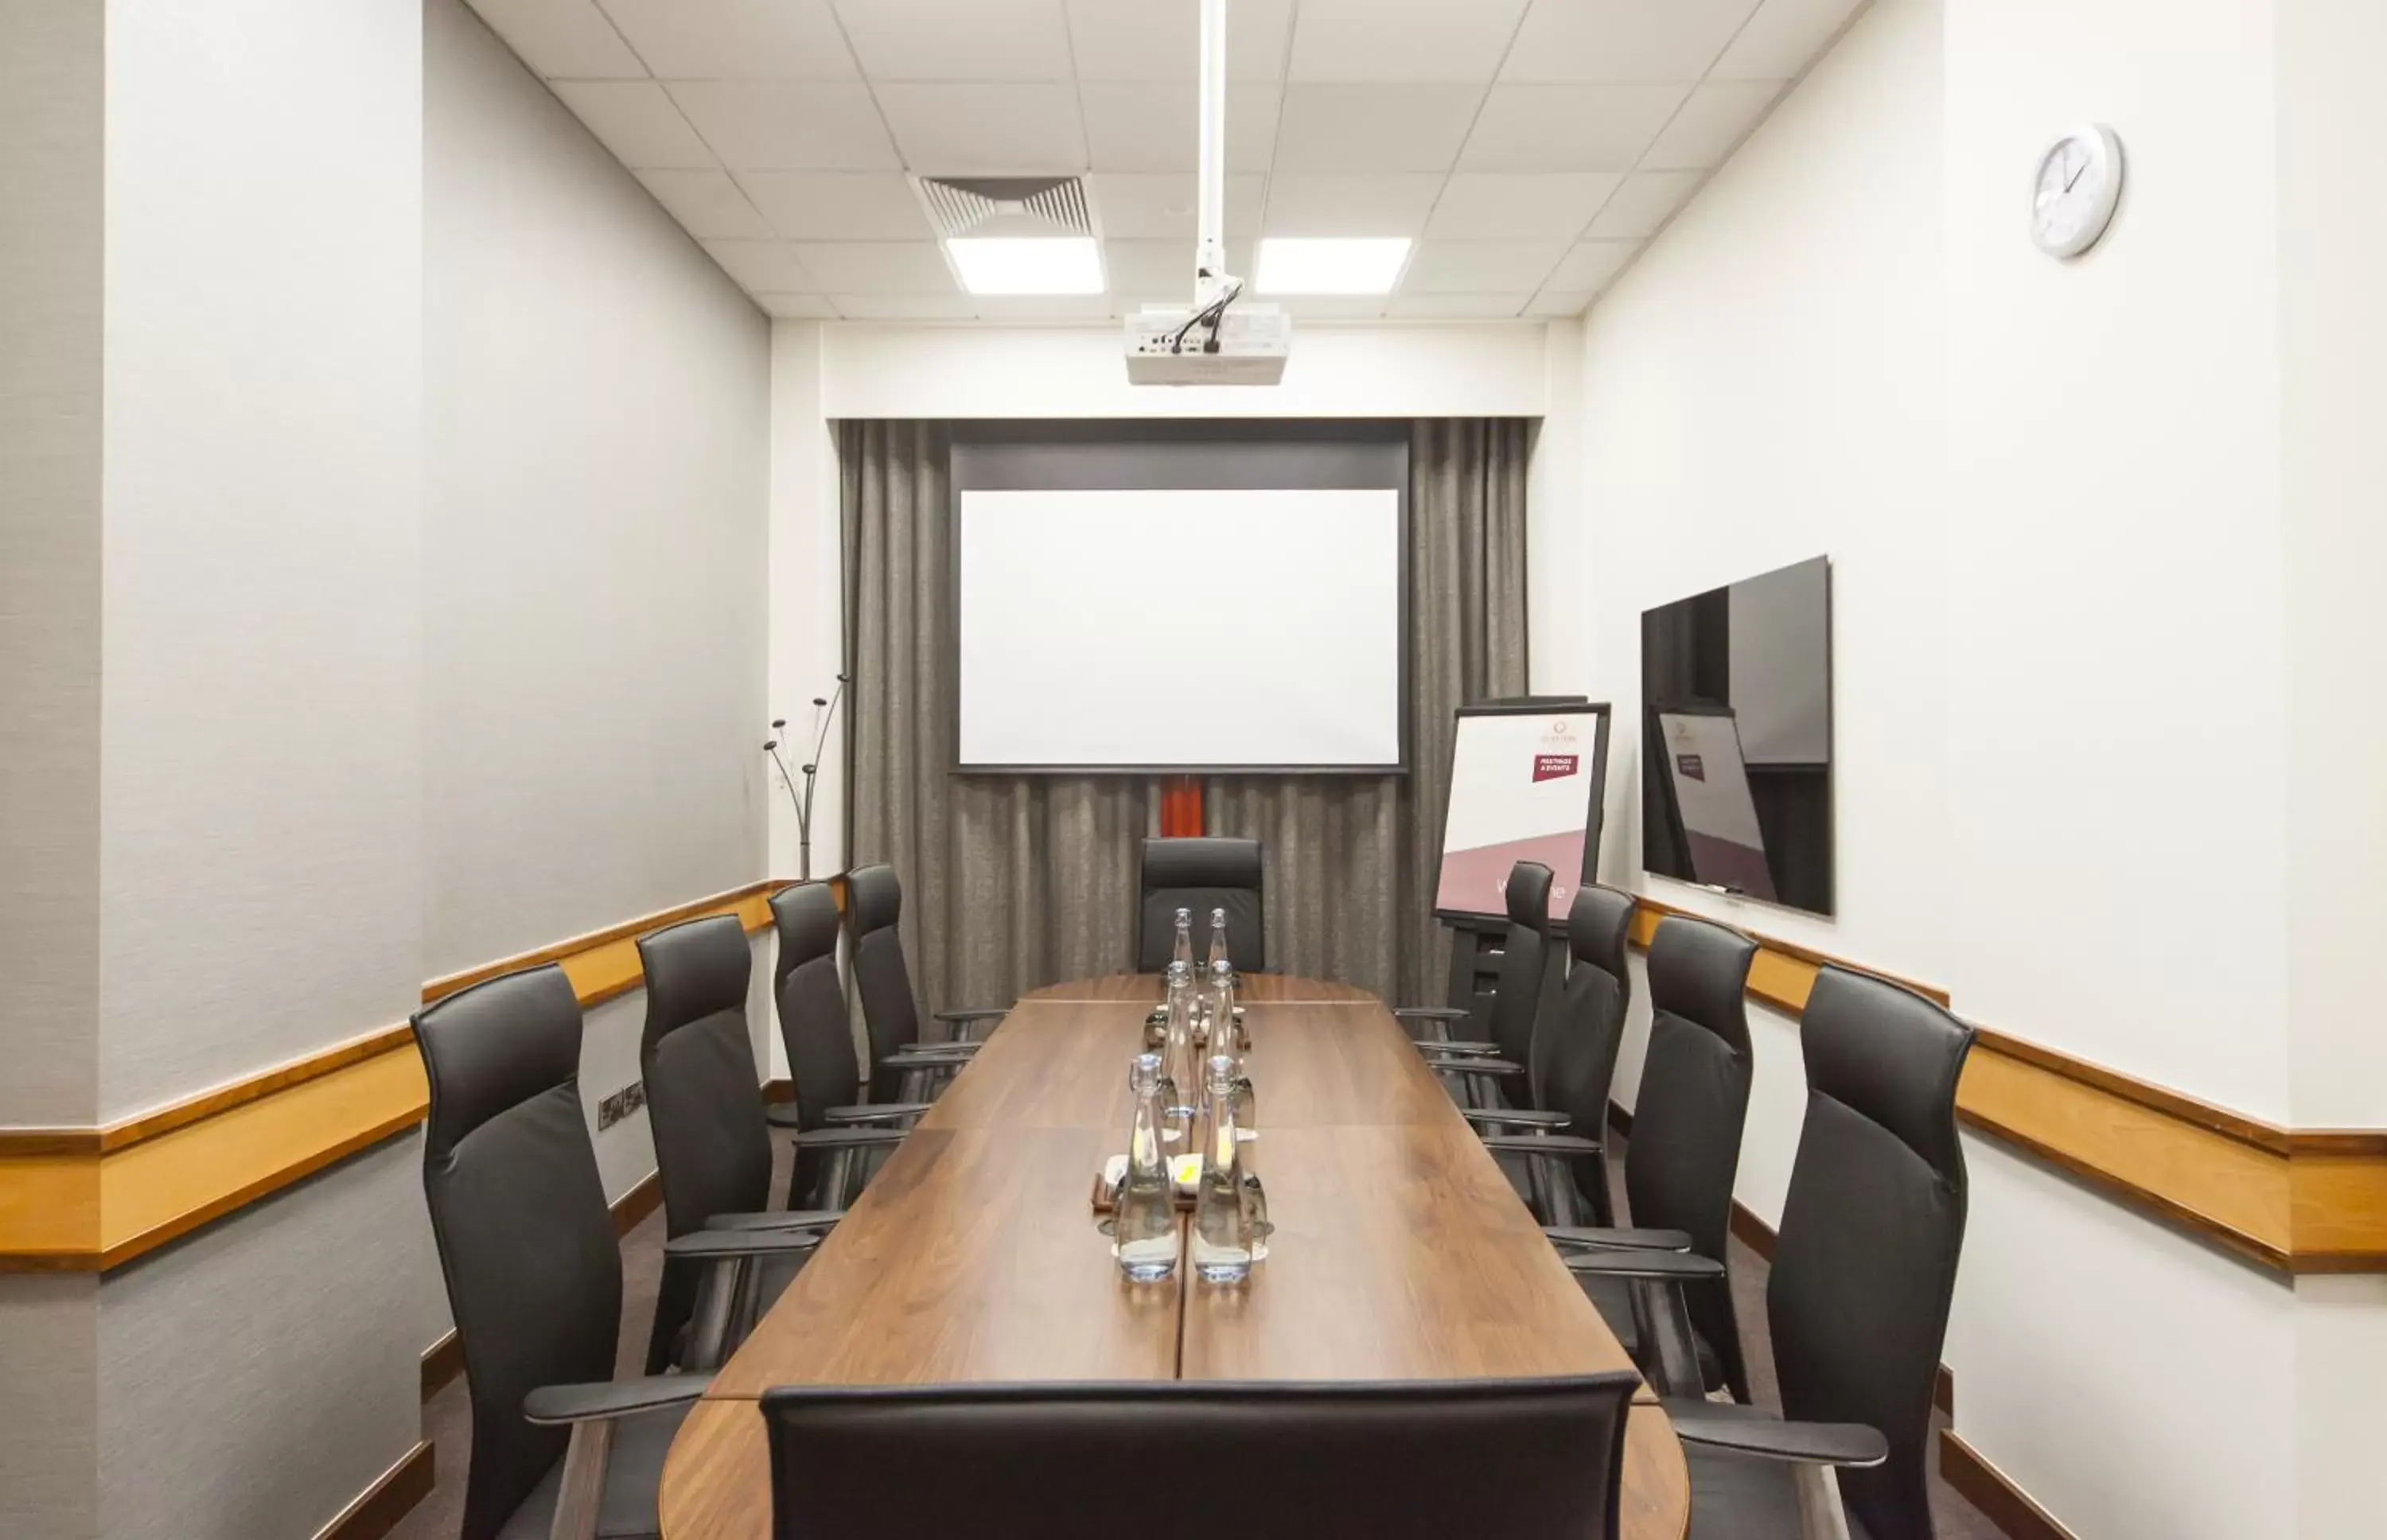 Meeting/conference room in Clayton Hotel, Leeds